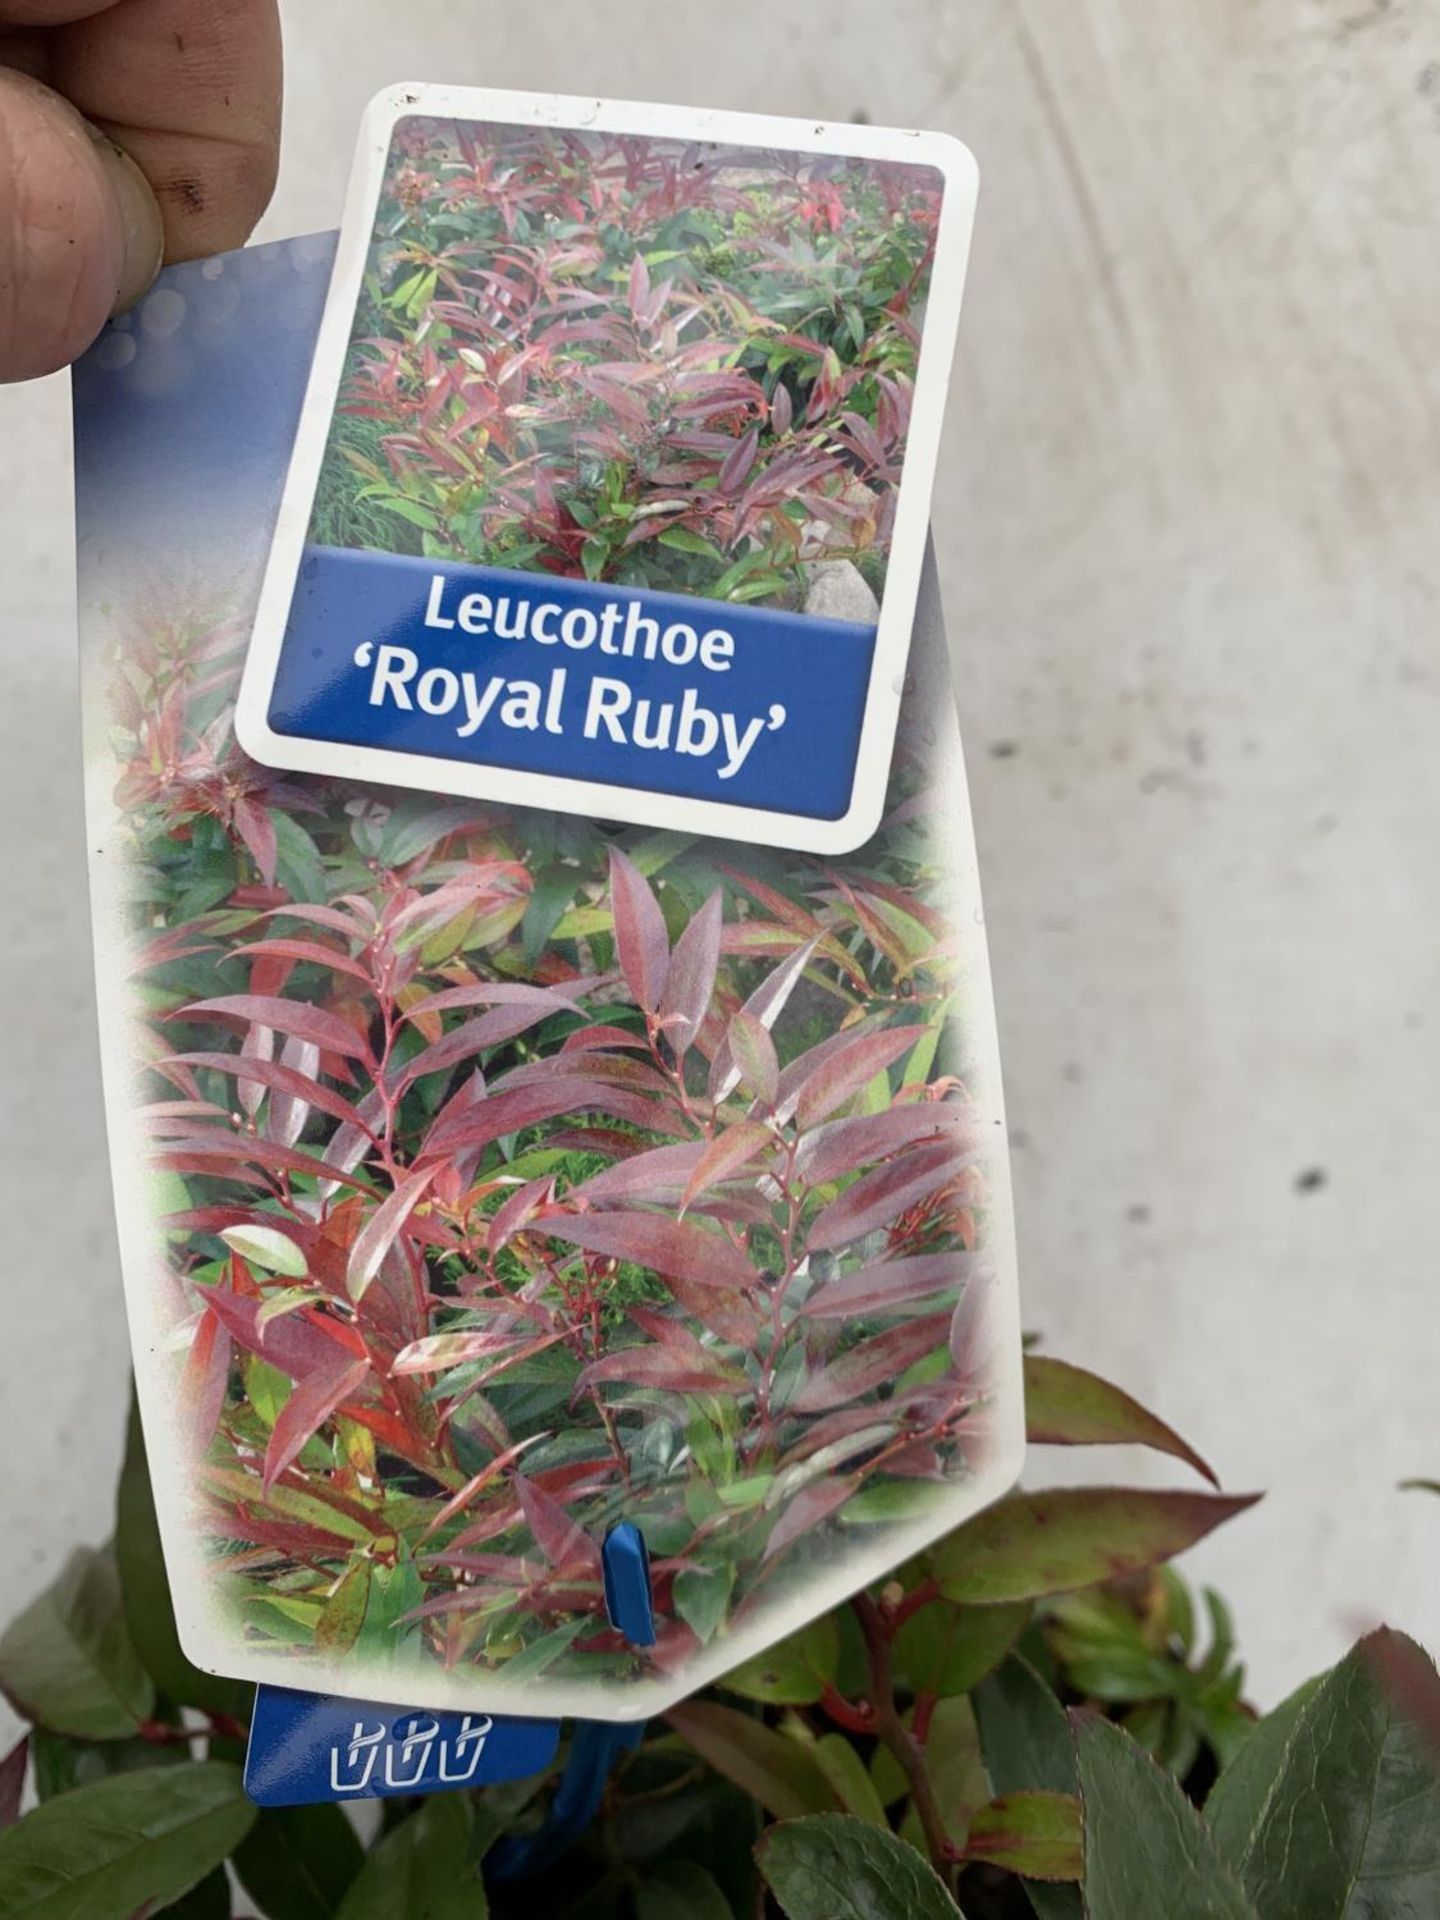 TWO LEUCOTHOE DARK DIAMOND AND ROYAL RUBY IN 2 LTR POTS 35CM TALL PLUS VAT TO BE SOLD FOR THE TWO - Image 5 of 5